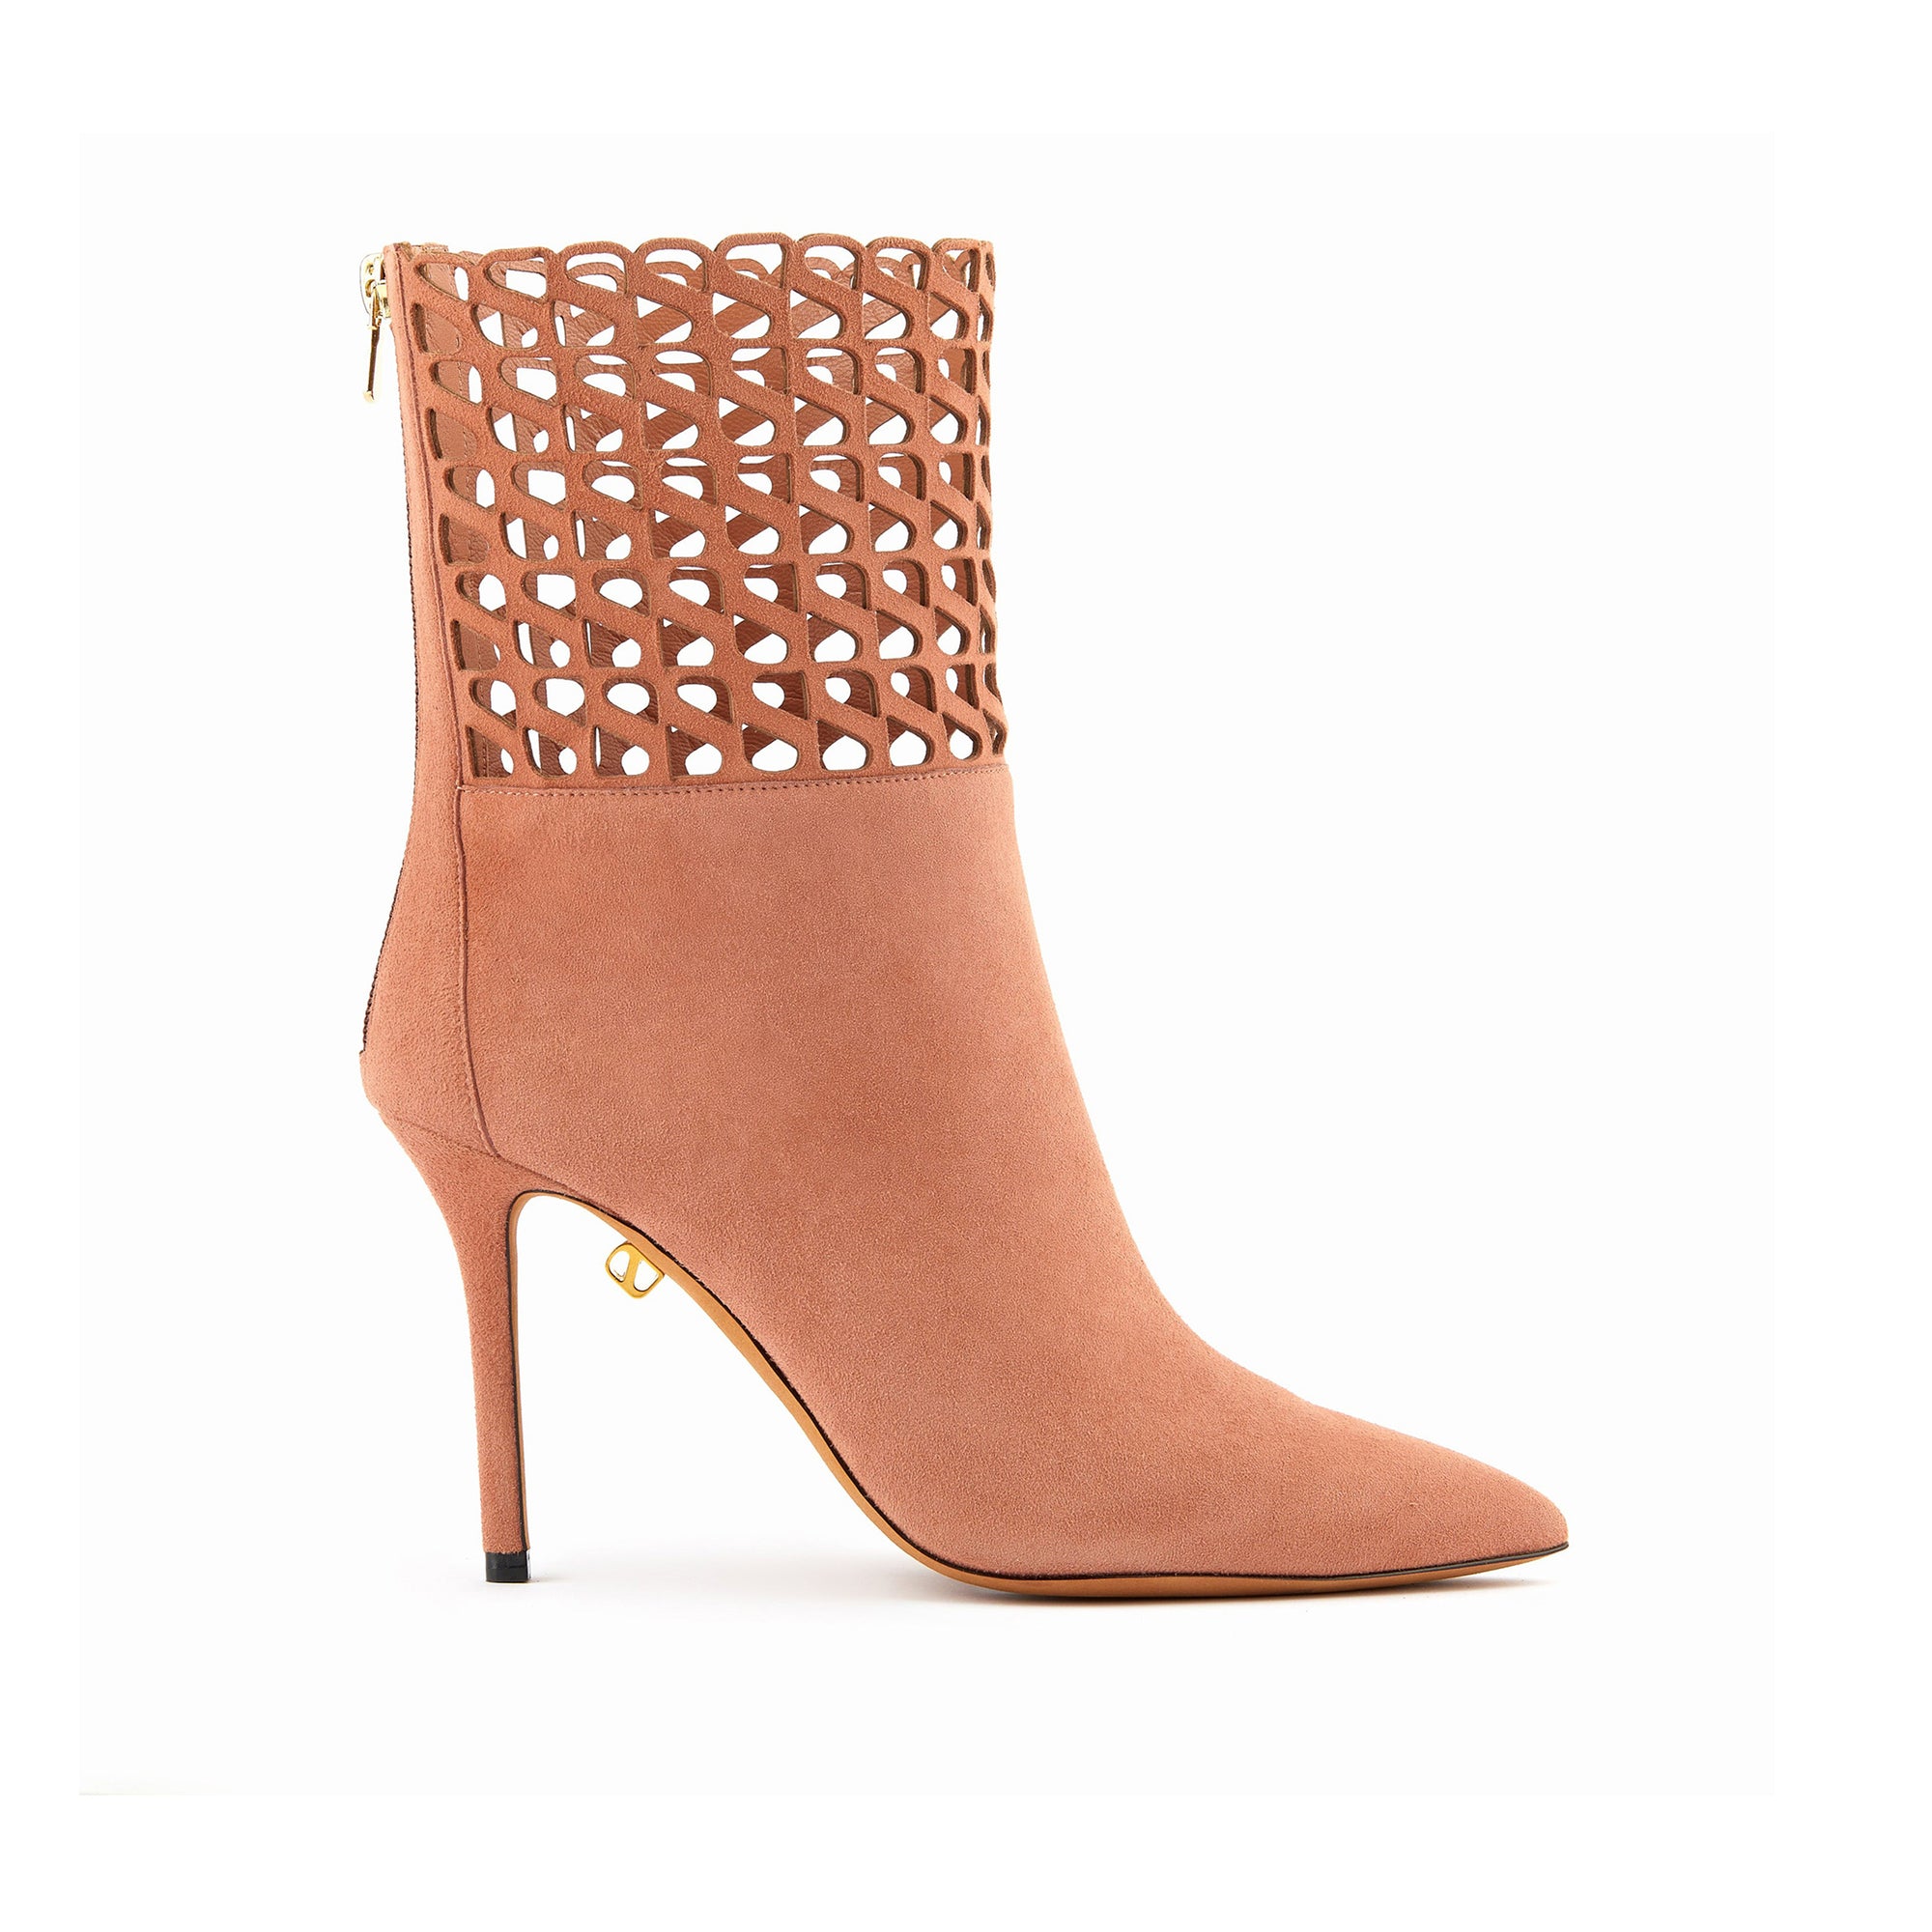 Alexia 90 heeled boots in suede - Rose